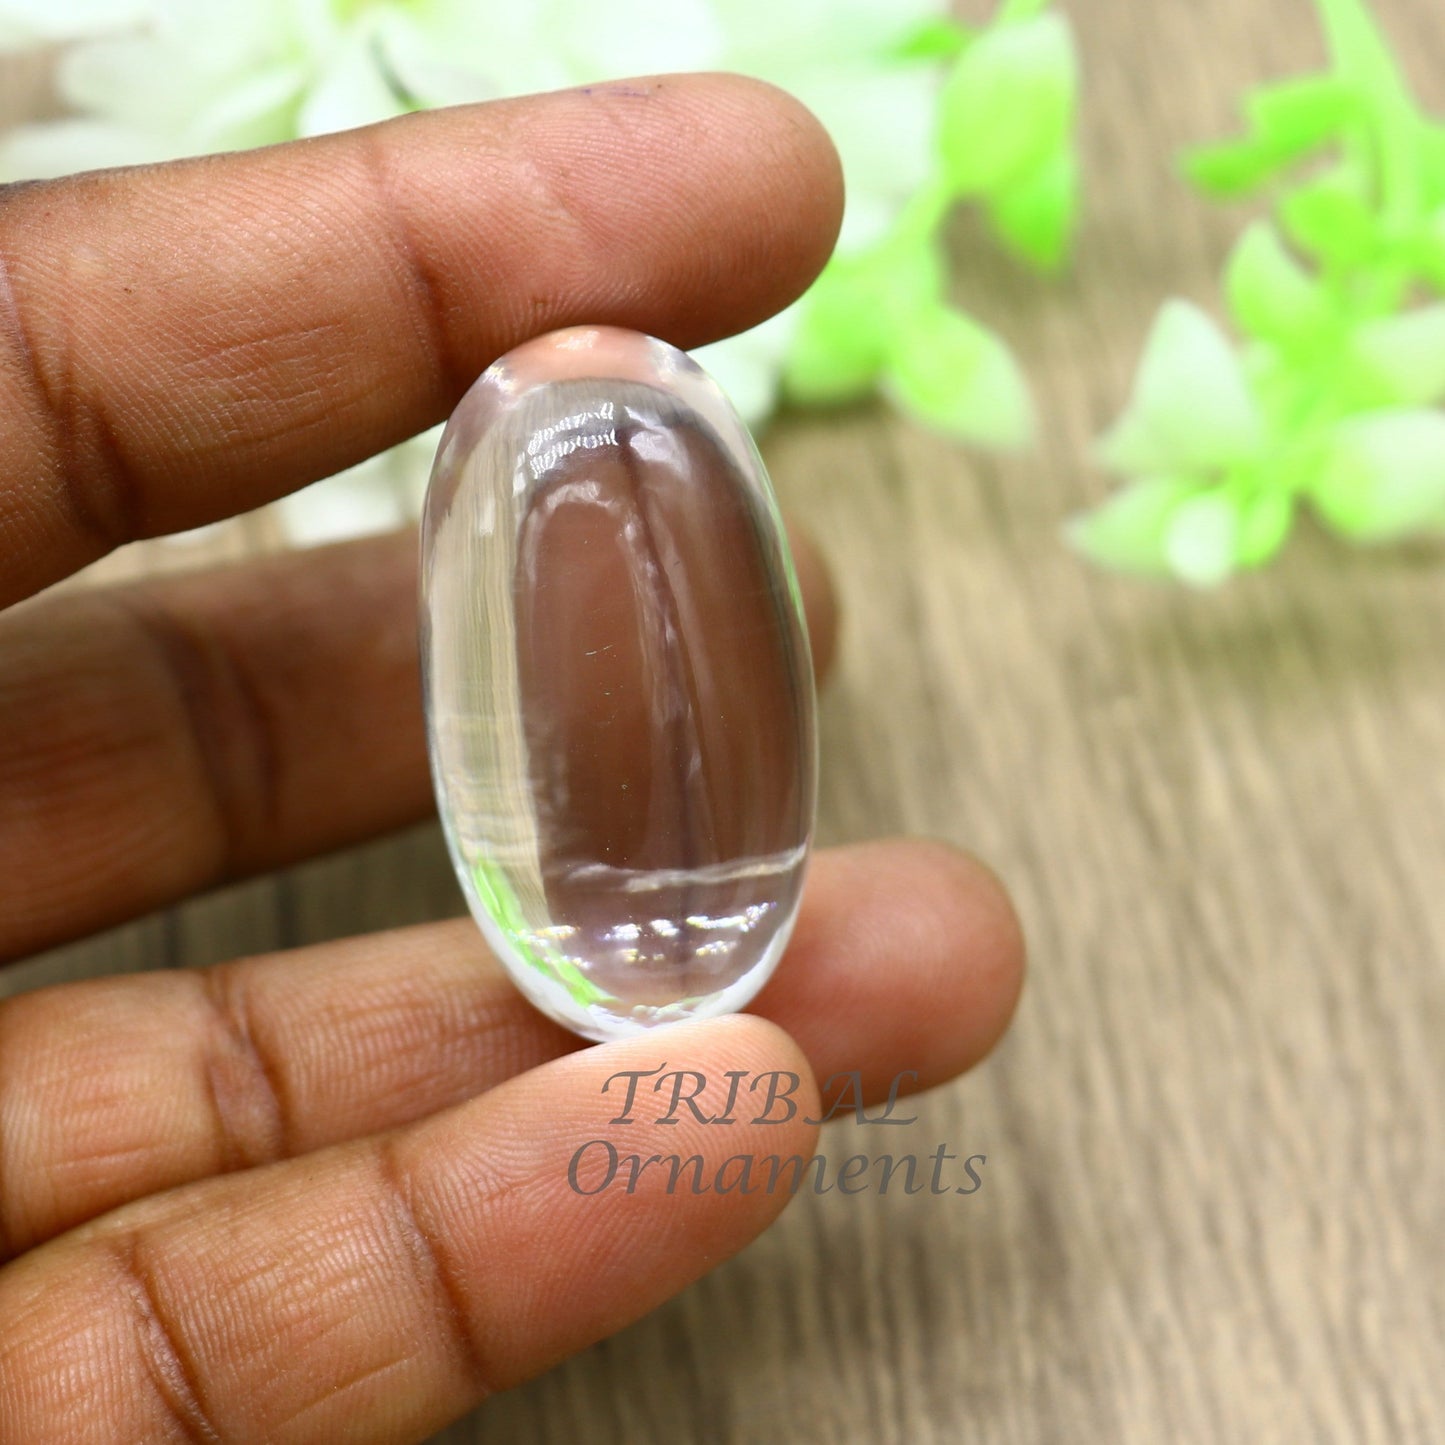 Divine Natural sphatik crystal stone divine lord shiva lingam statue, amazing sphatik lingam puja article for wealth and prosperity stna24 - TRIBAL ORNAMENTS